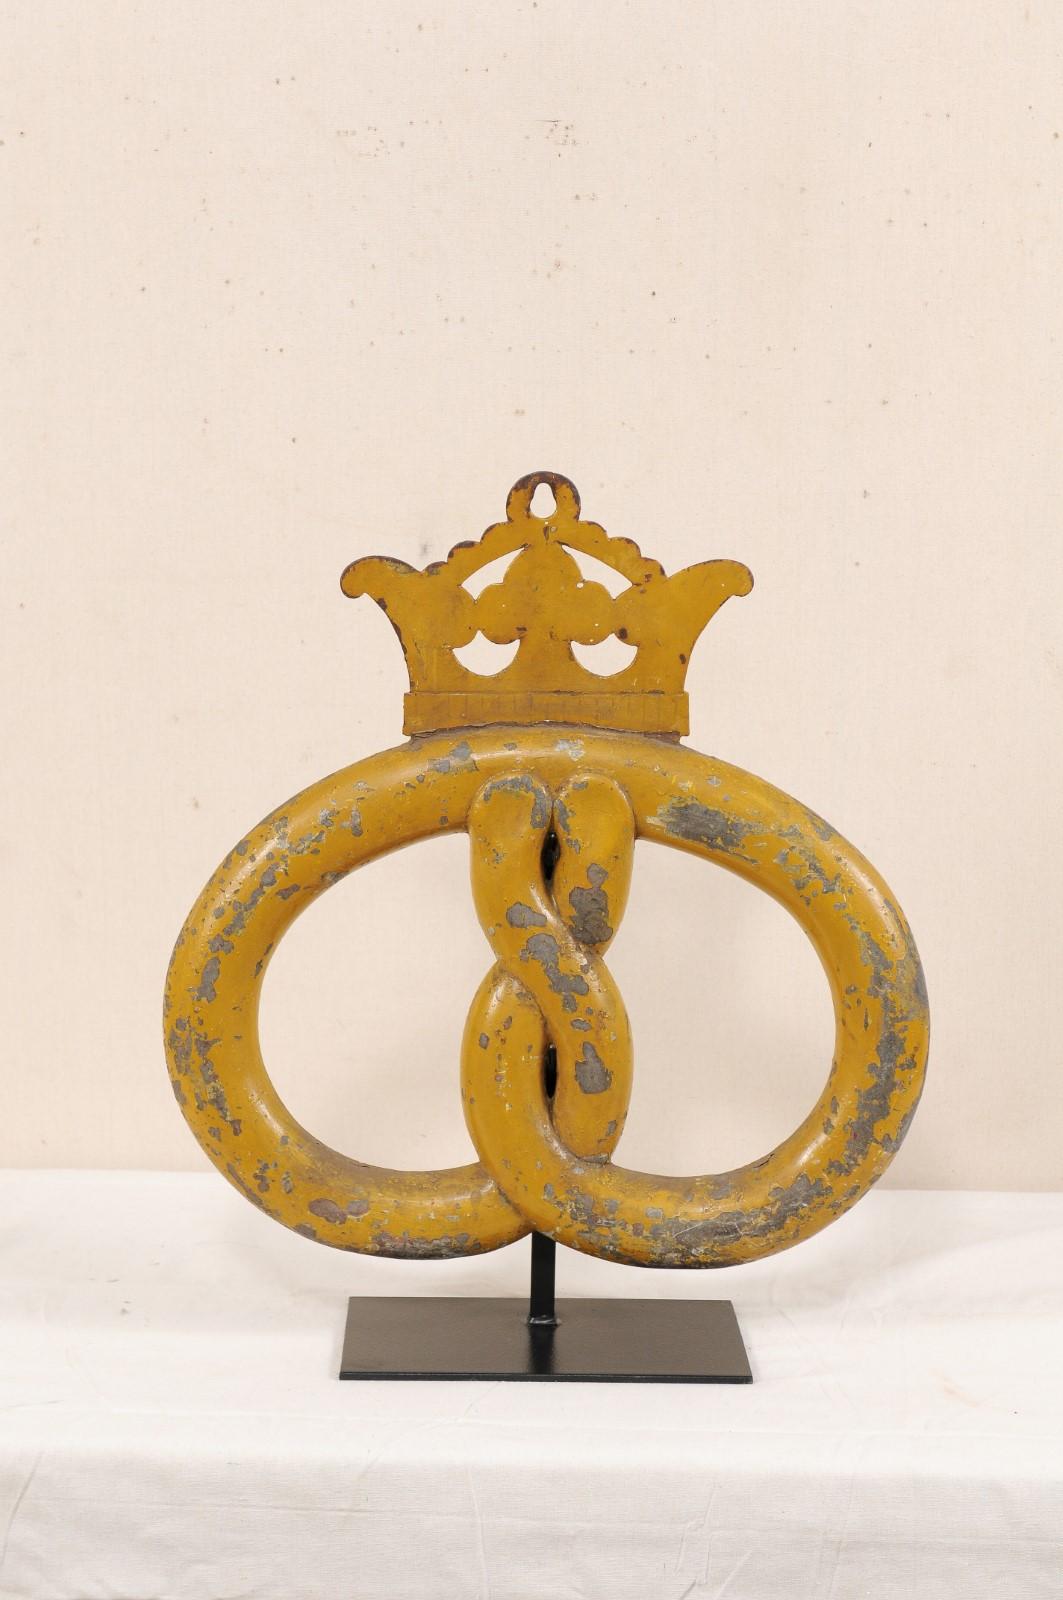 A 19th century baker's pretzel shop sign from Denmark, mounted on custom iron Stand. This antique pretzel, formed of metal, originally would have hung from an arm extended out near the exterior entrance of a bakery or pastry shop. The pretzel is